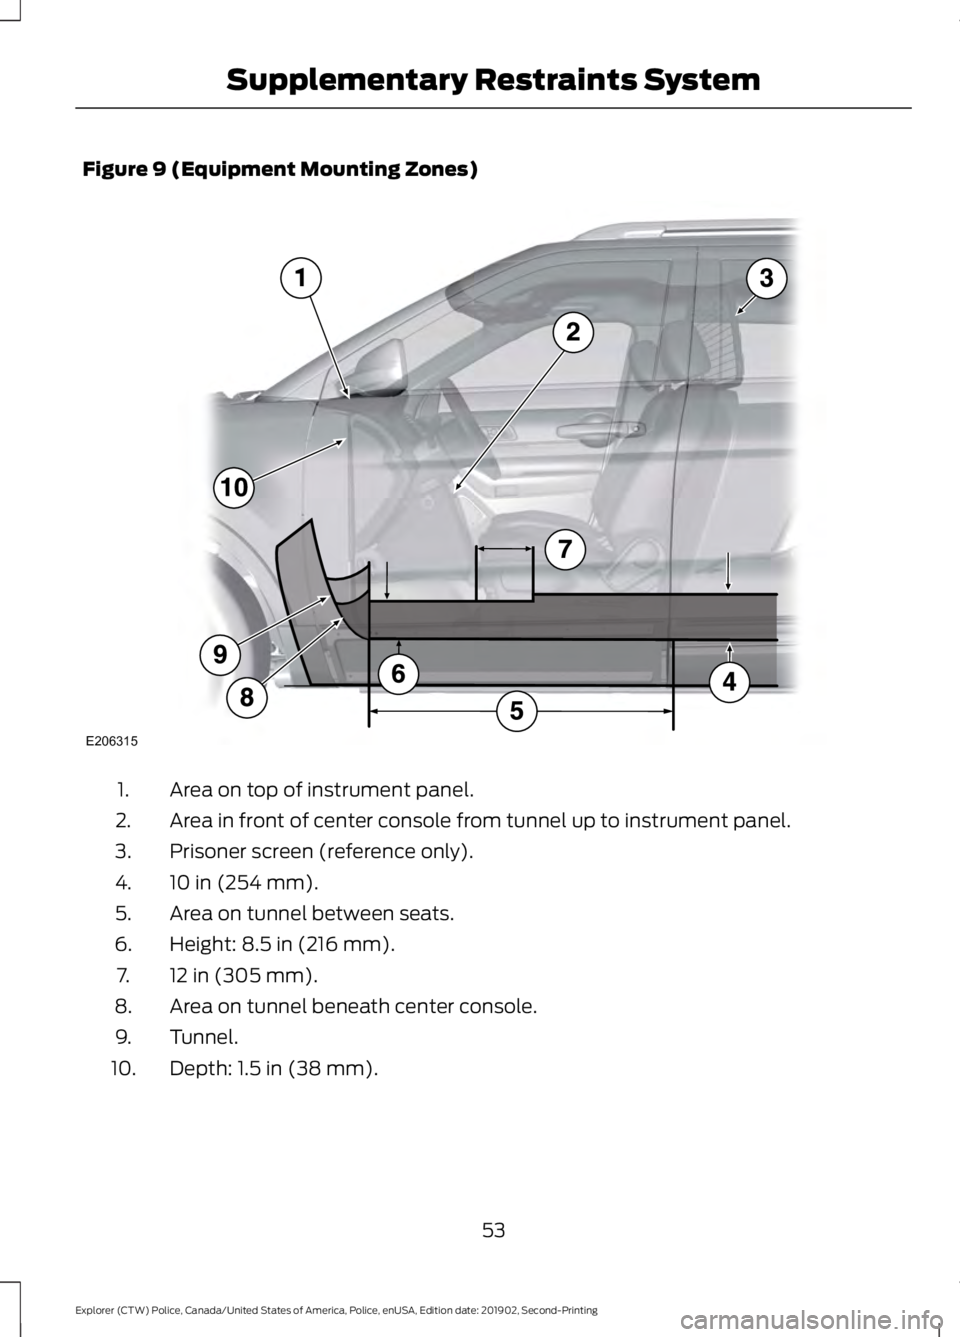 FORD POLICE INTERCEPTOR 2020  Owners Manual Figure 9 (Equipment Mounting Zones)
Area on top of instrument panel.
1.
Area in front of center console from tunnel up to instrument panel.
2.
Prisoner screen (reference only).
3.
10 in (254 mm).
4.
A